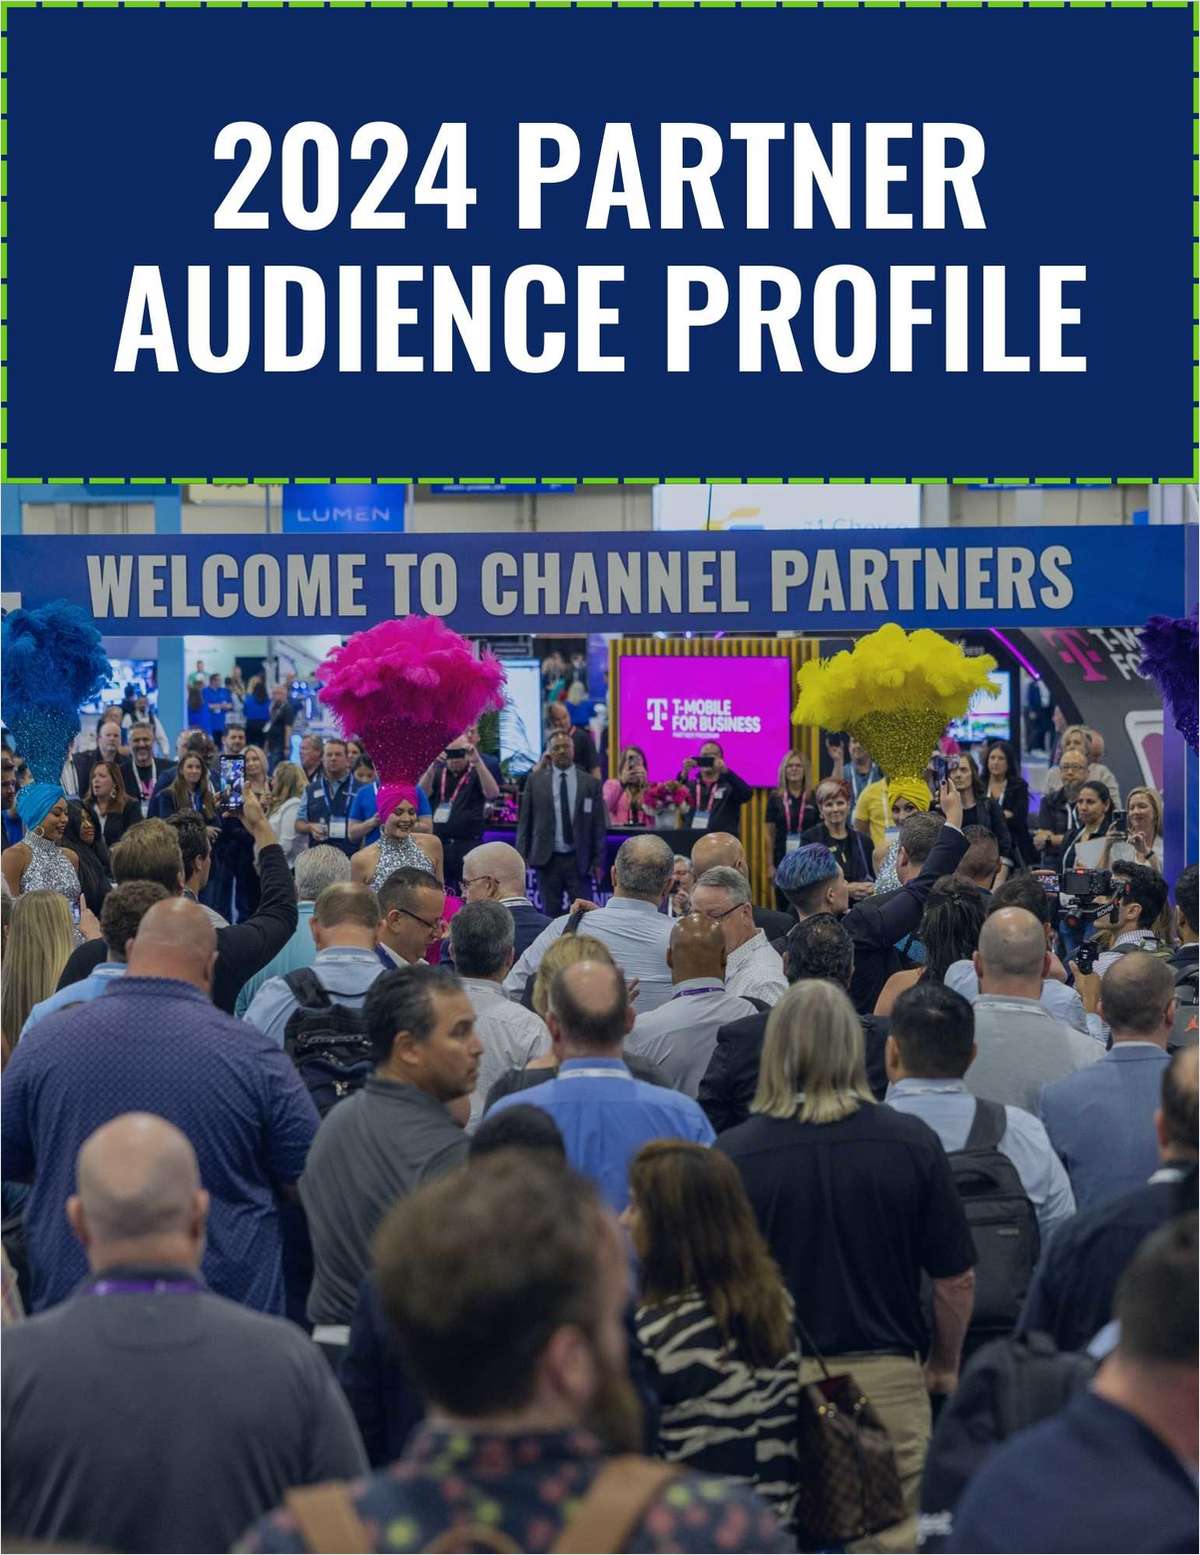 Partner Audience Profile - Channel Partners Conference & Expo 2024